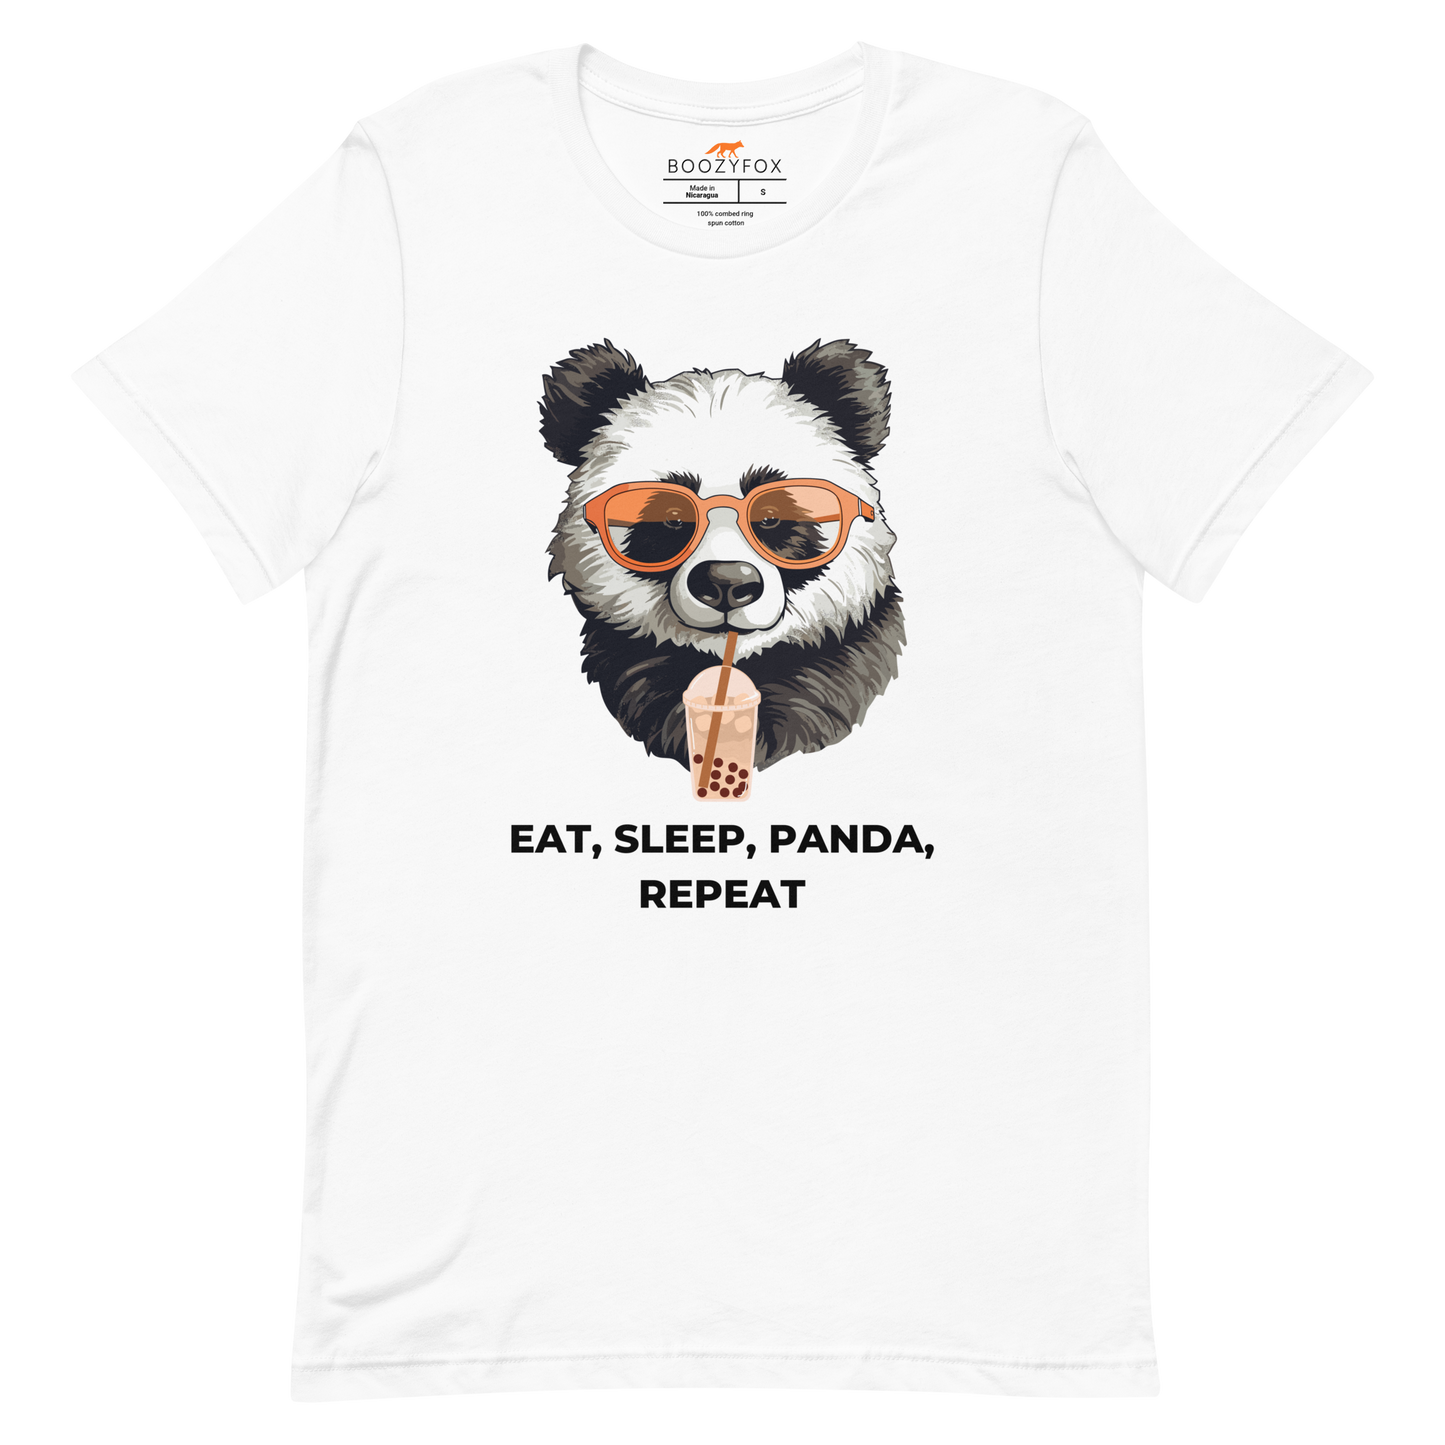 White Premium Panda Tee featuring an adorable Eat, Sleep, Panda, Repeat graphic on the chest - Funny Graphic Panda Tees - Boozy Fox